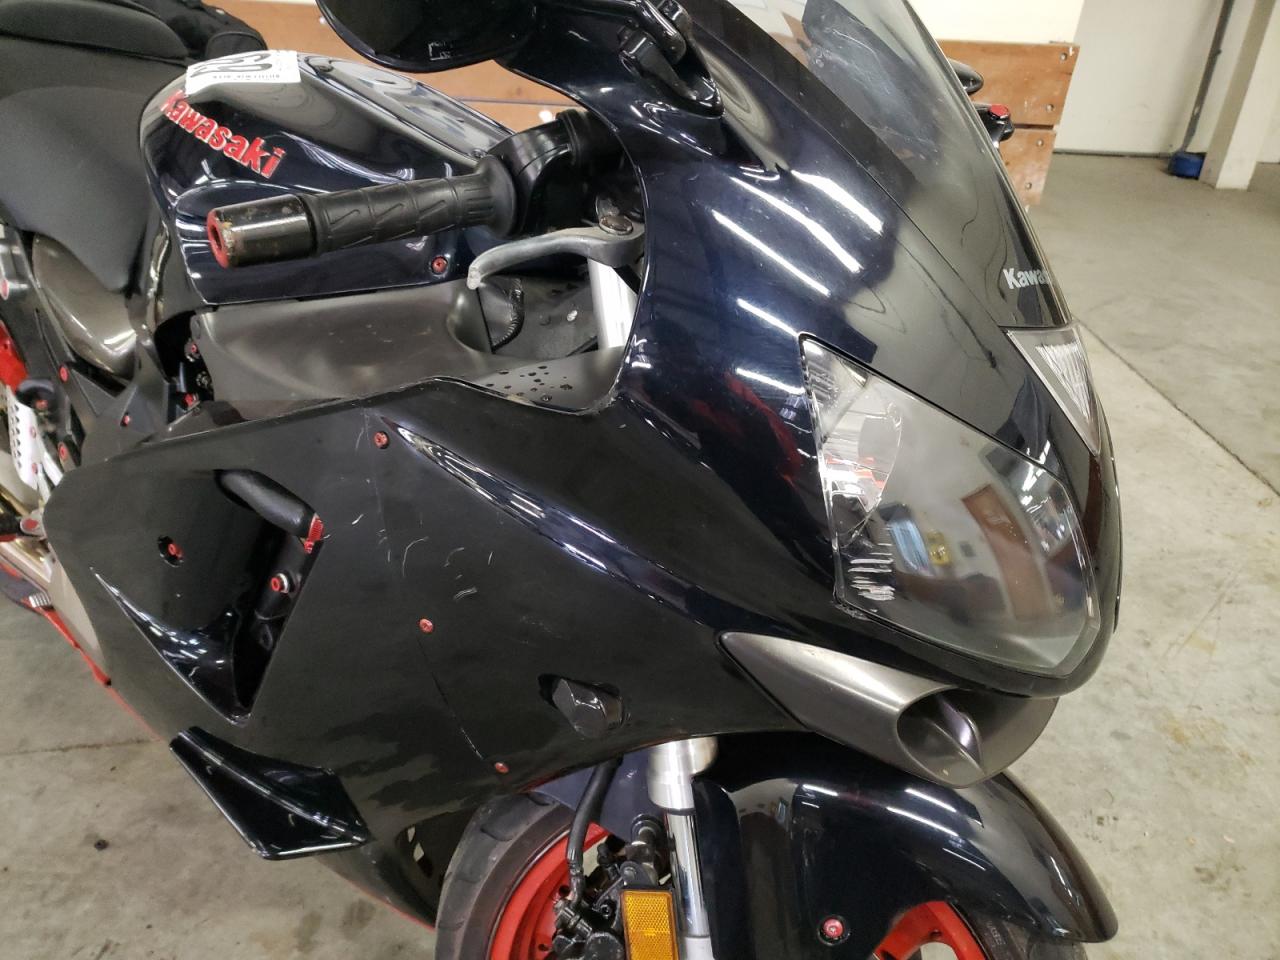 2002 Kawasaki ZX1200 B for sale at Copart Portland, OR. Lot #69275 